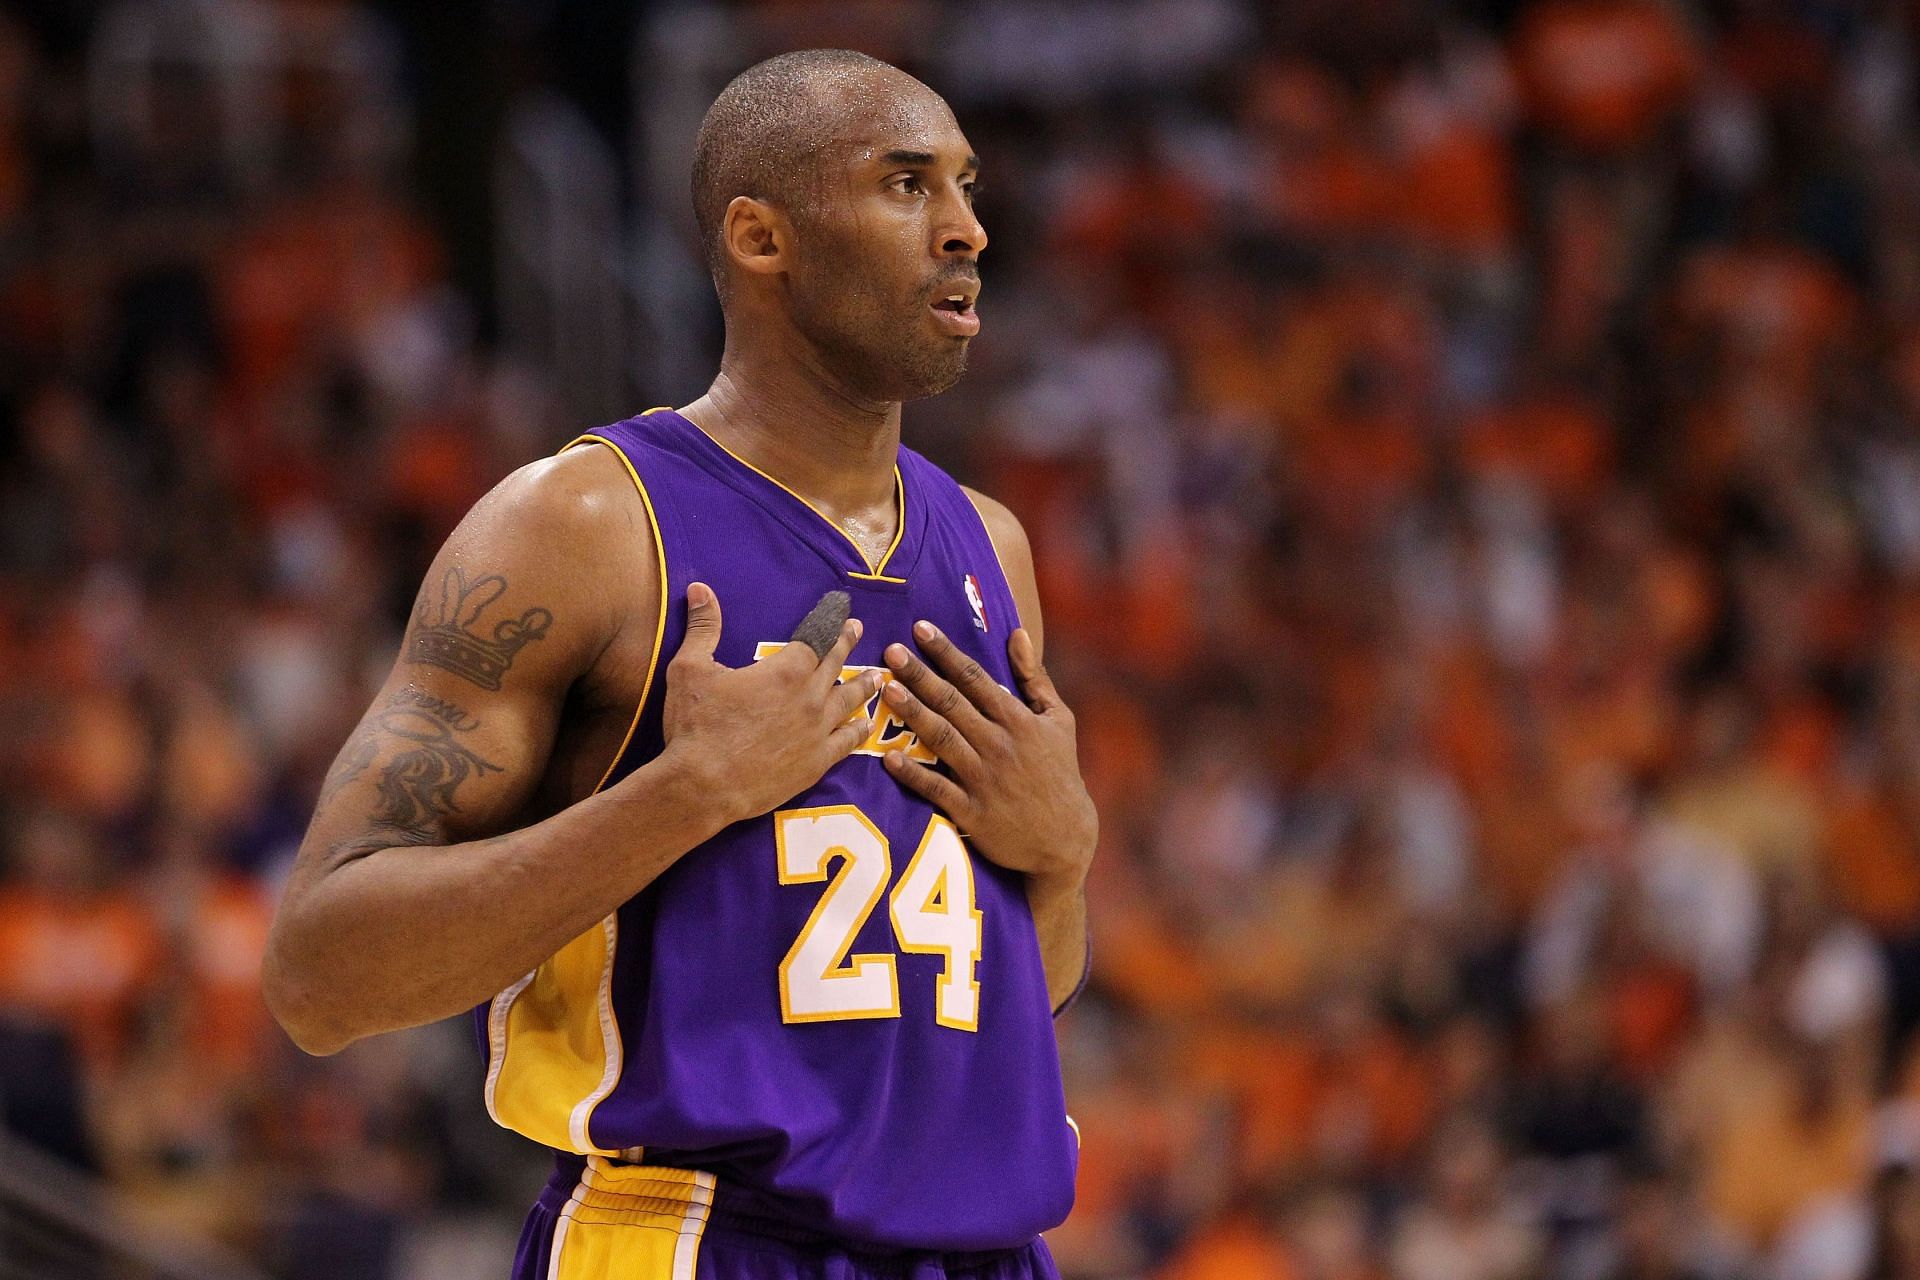 Kobe Bryant in action during a game